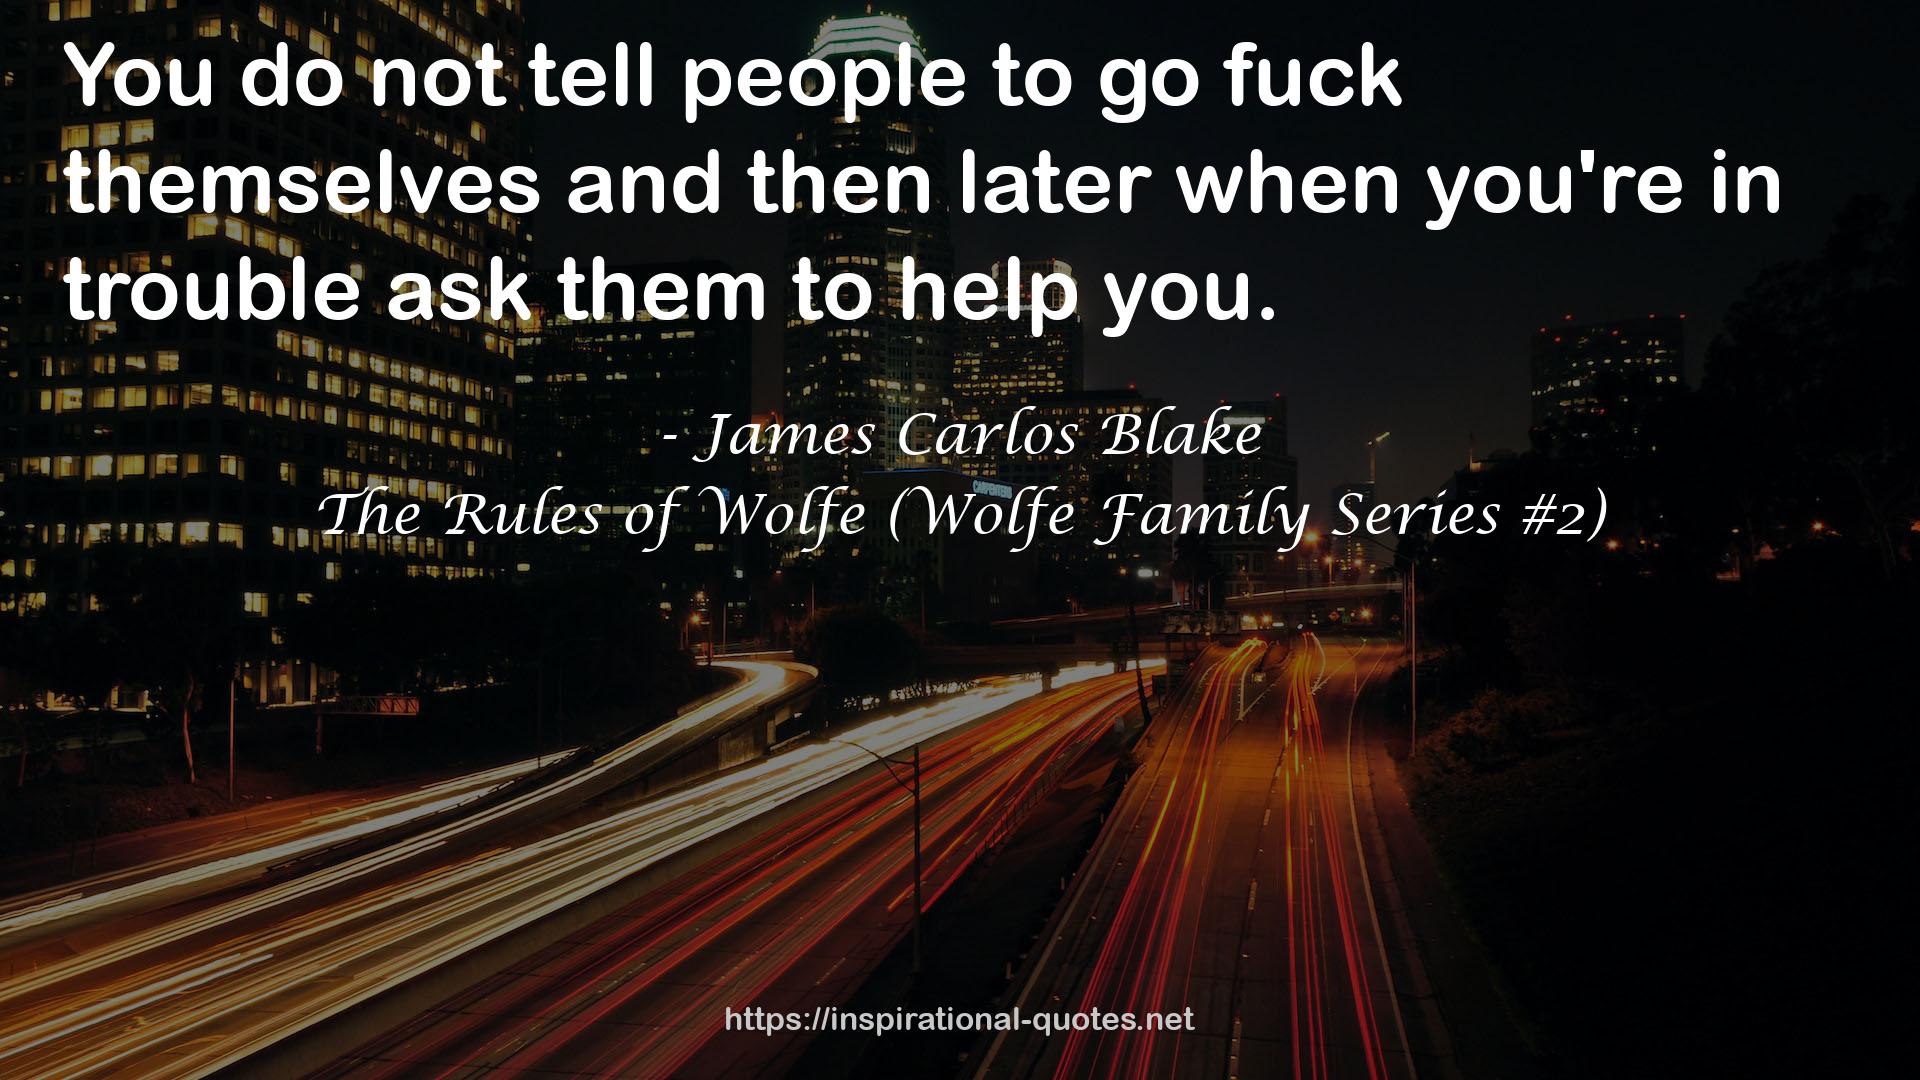 The Rules of Wolfe (Wolfe Family Series #2) QUOTES